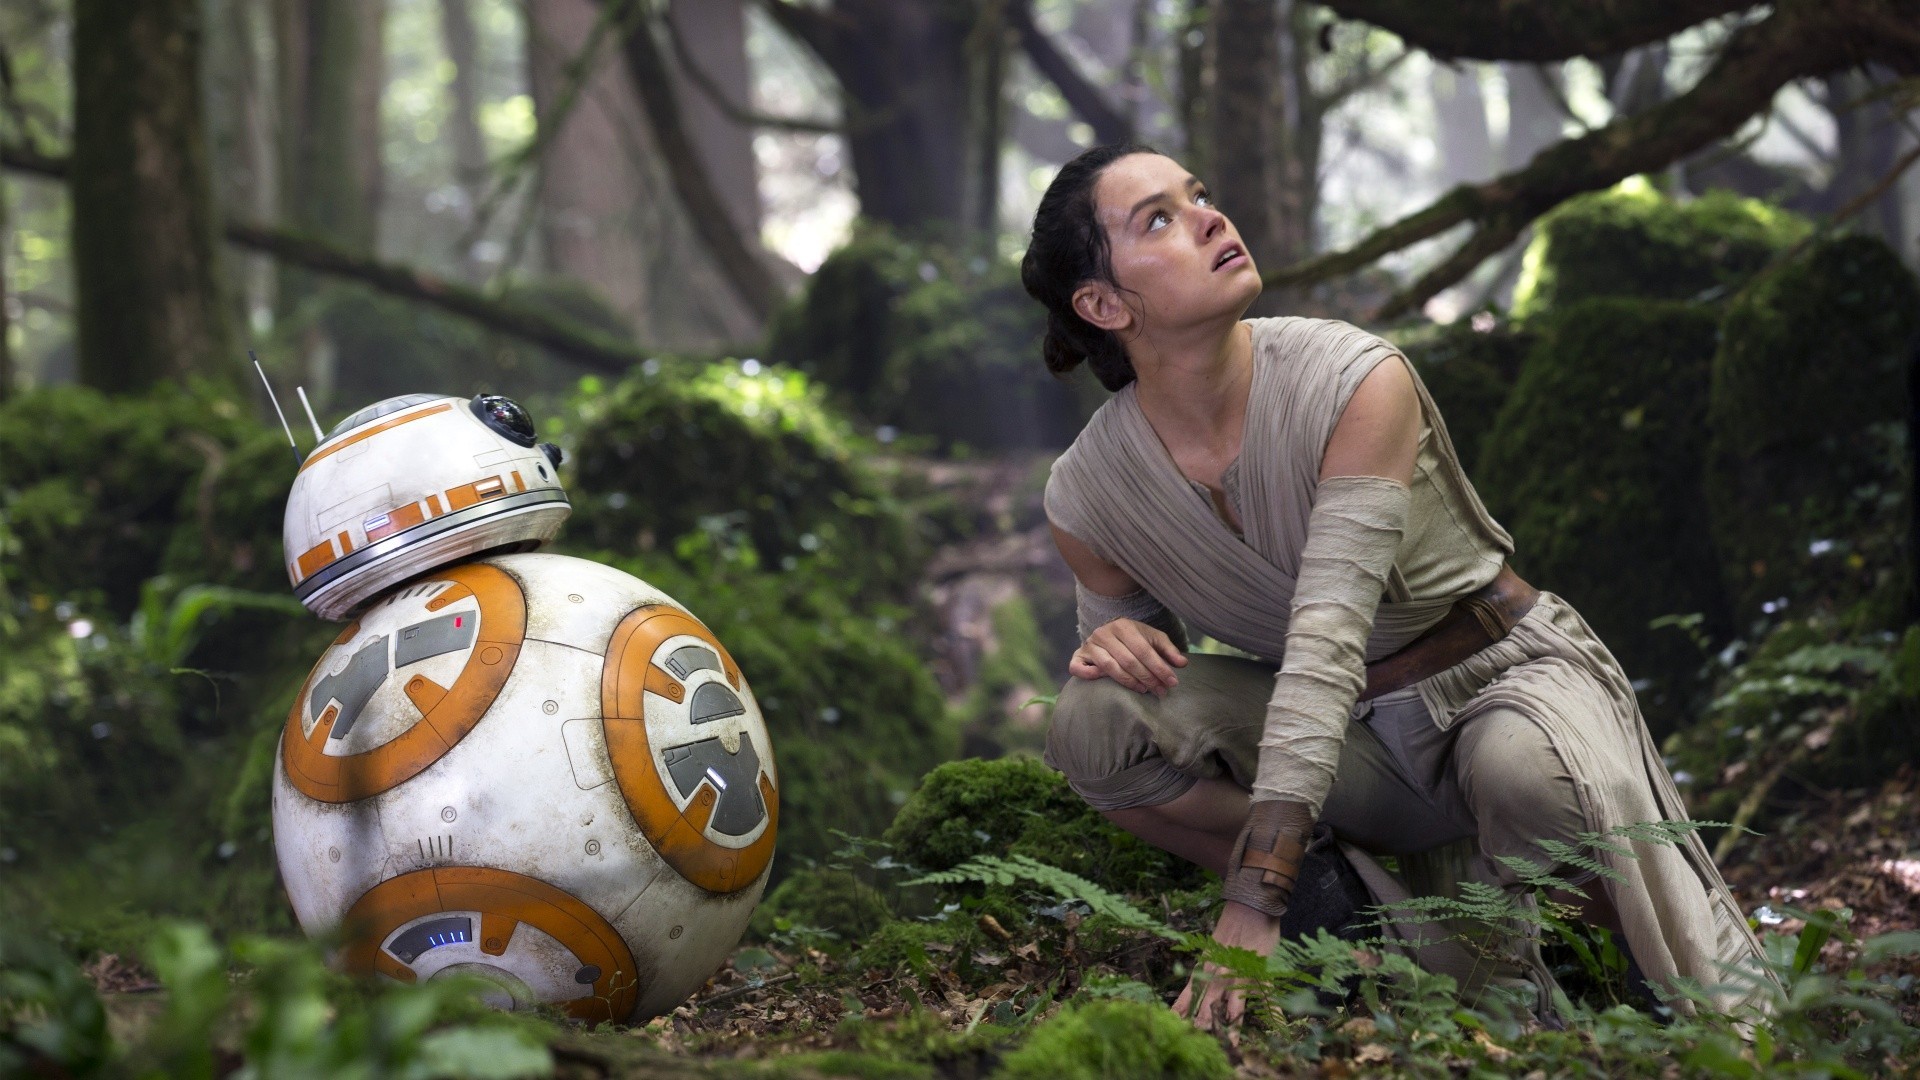 1920x1080  Star Wars The Force Awakens R2 D2 Rey Wallpapers | HD Wallpapers  Â· Download Â· Movie ...